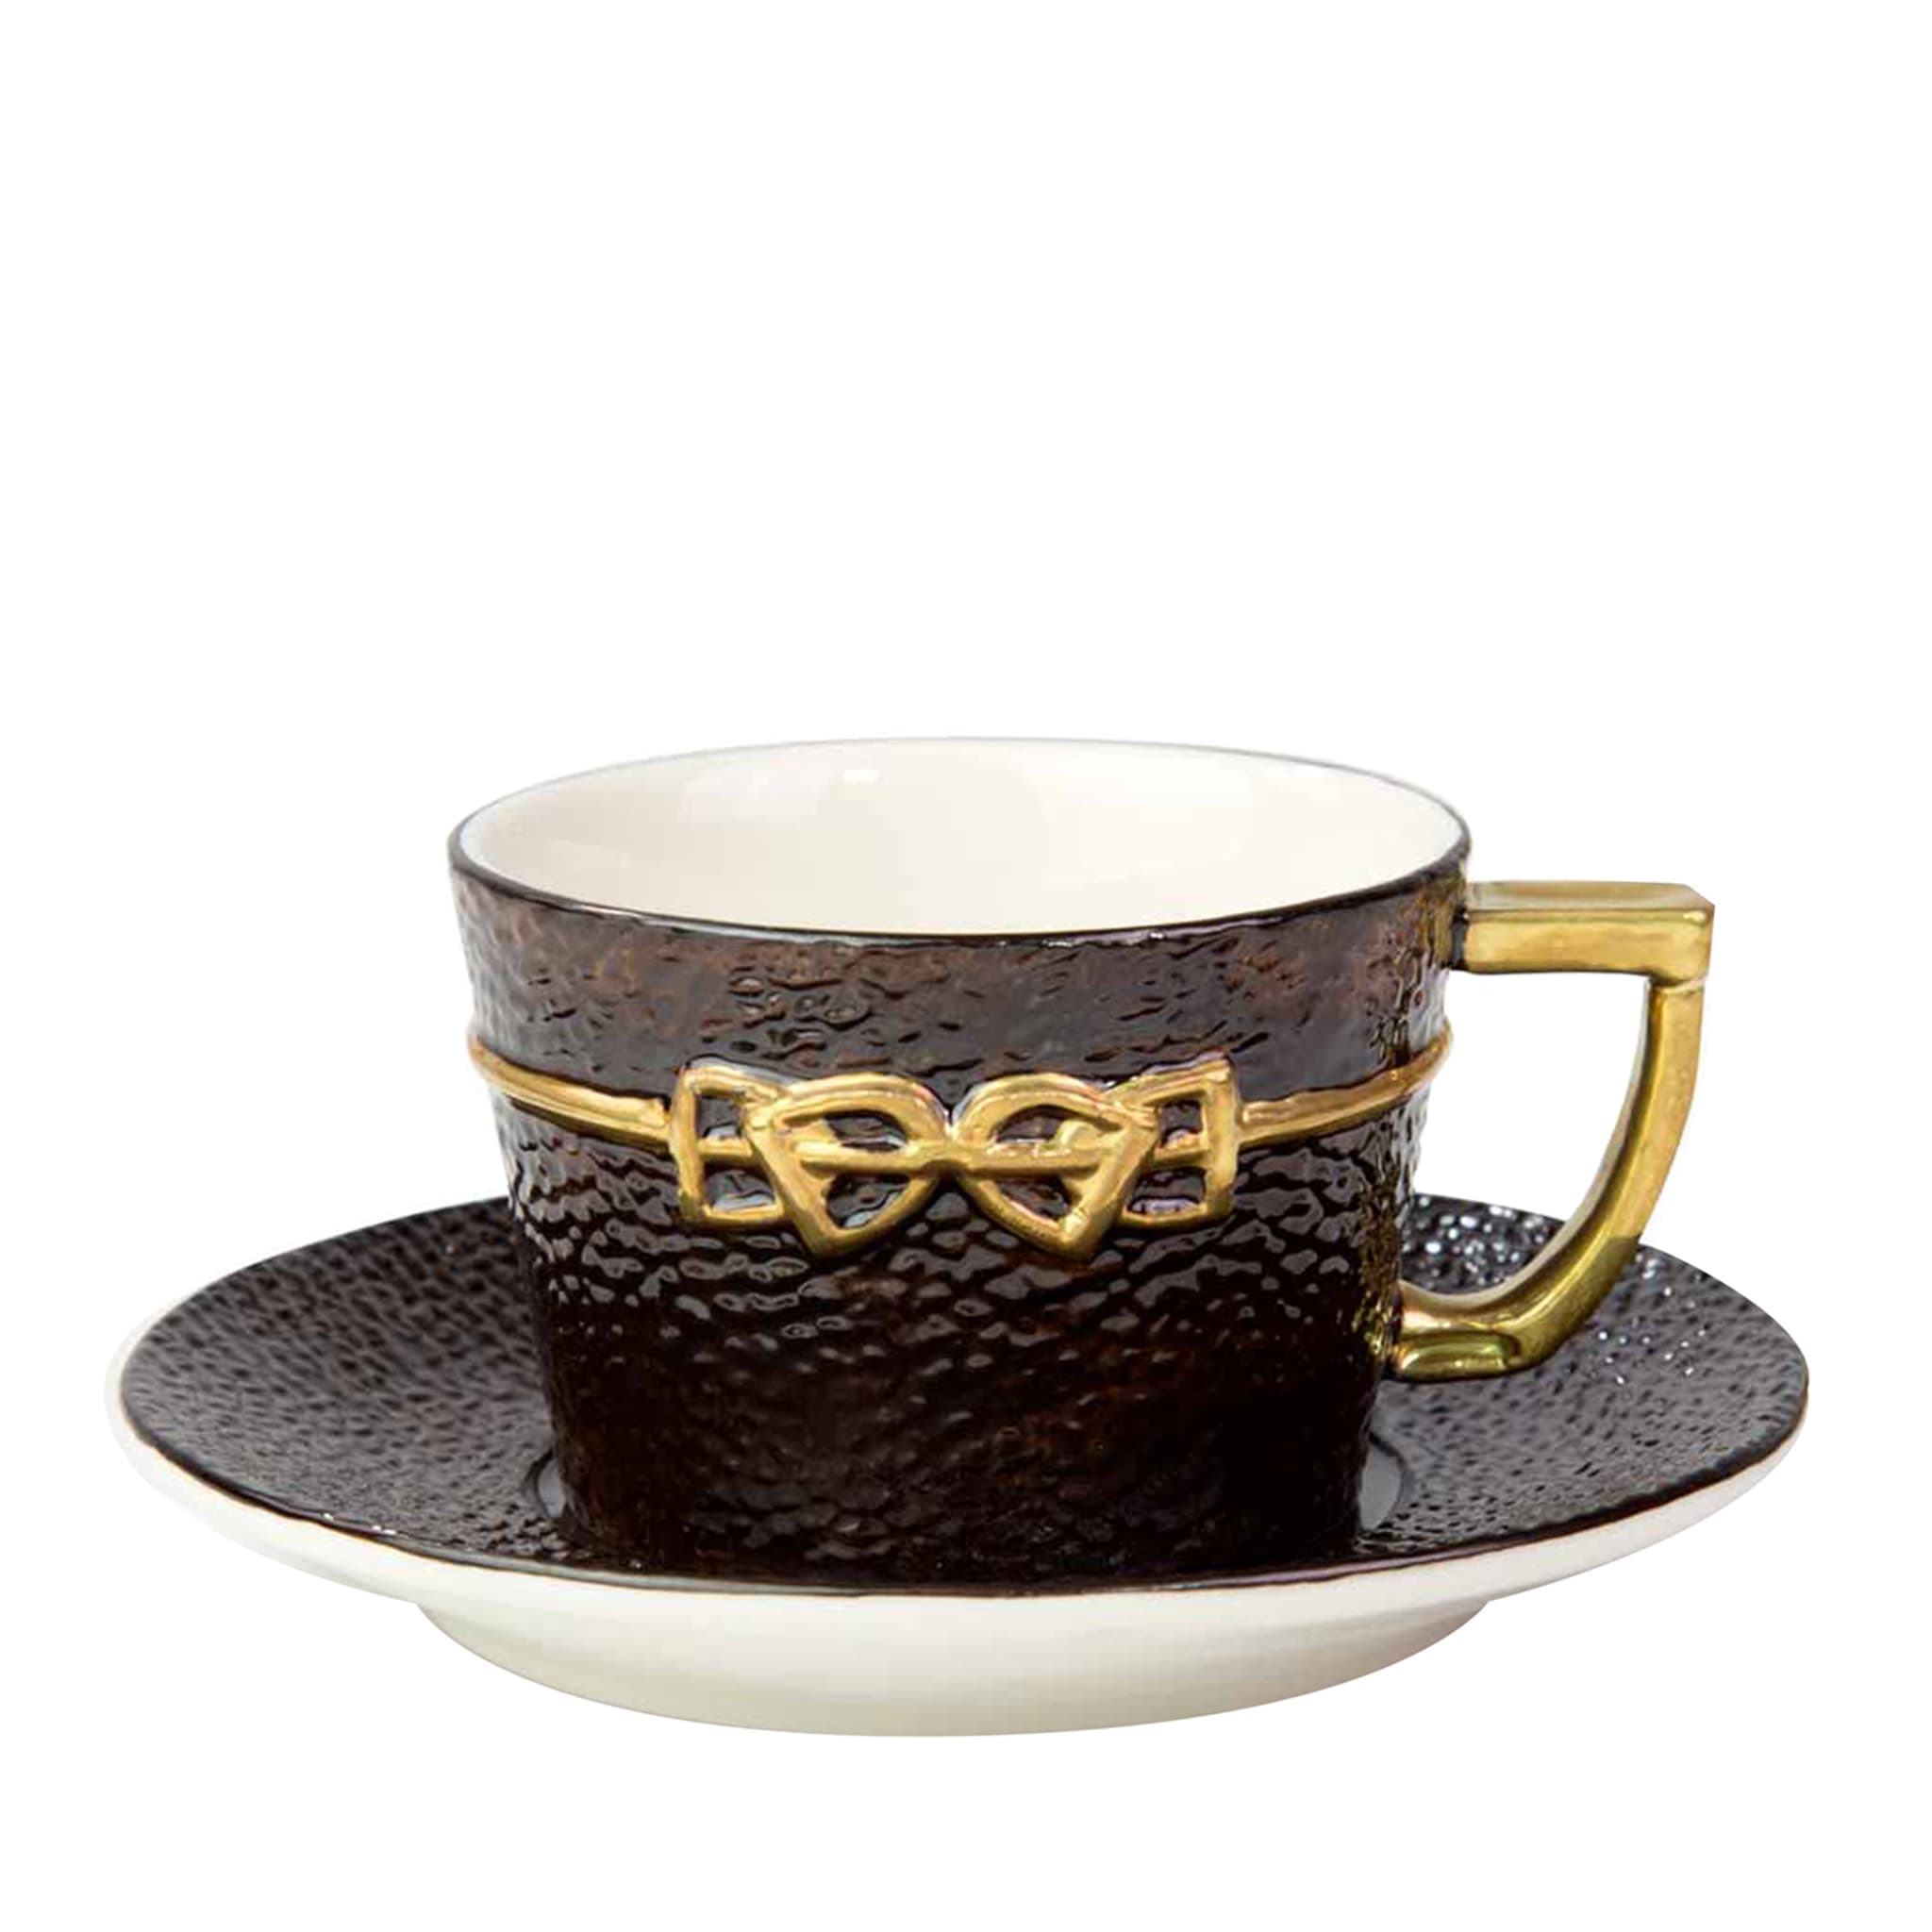 DRESSAGE COFFEE CUP AND SAUCER - BLACK AND GOLD - Main view